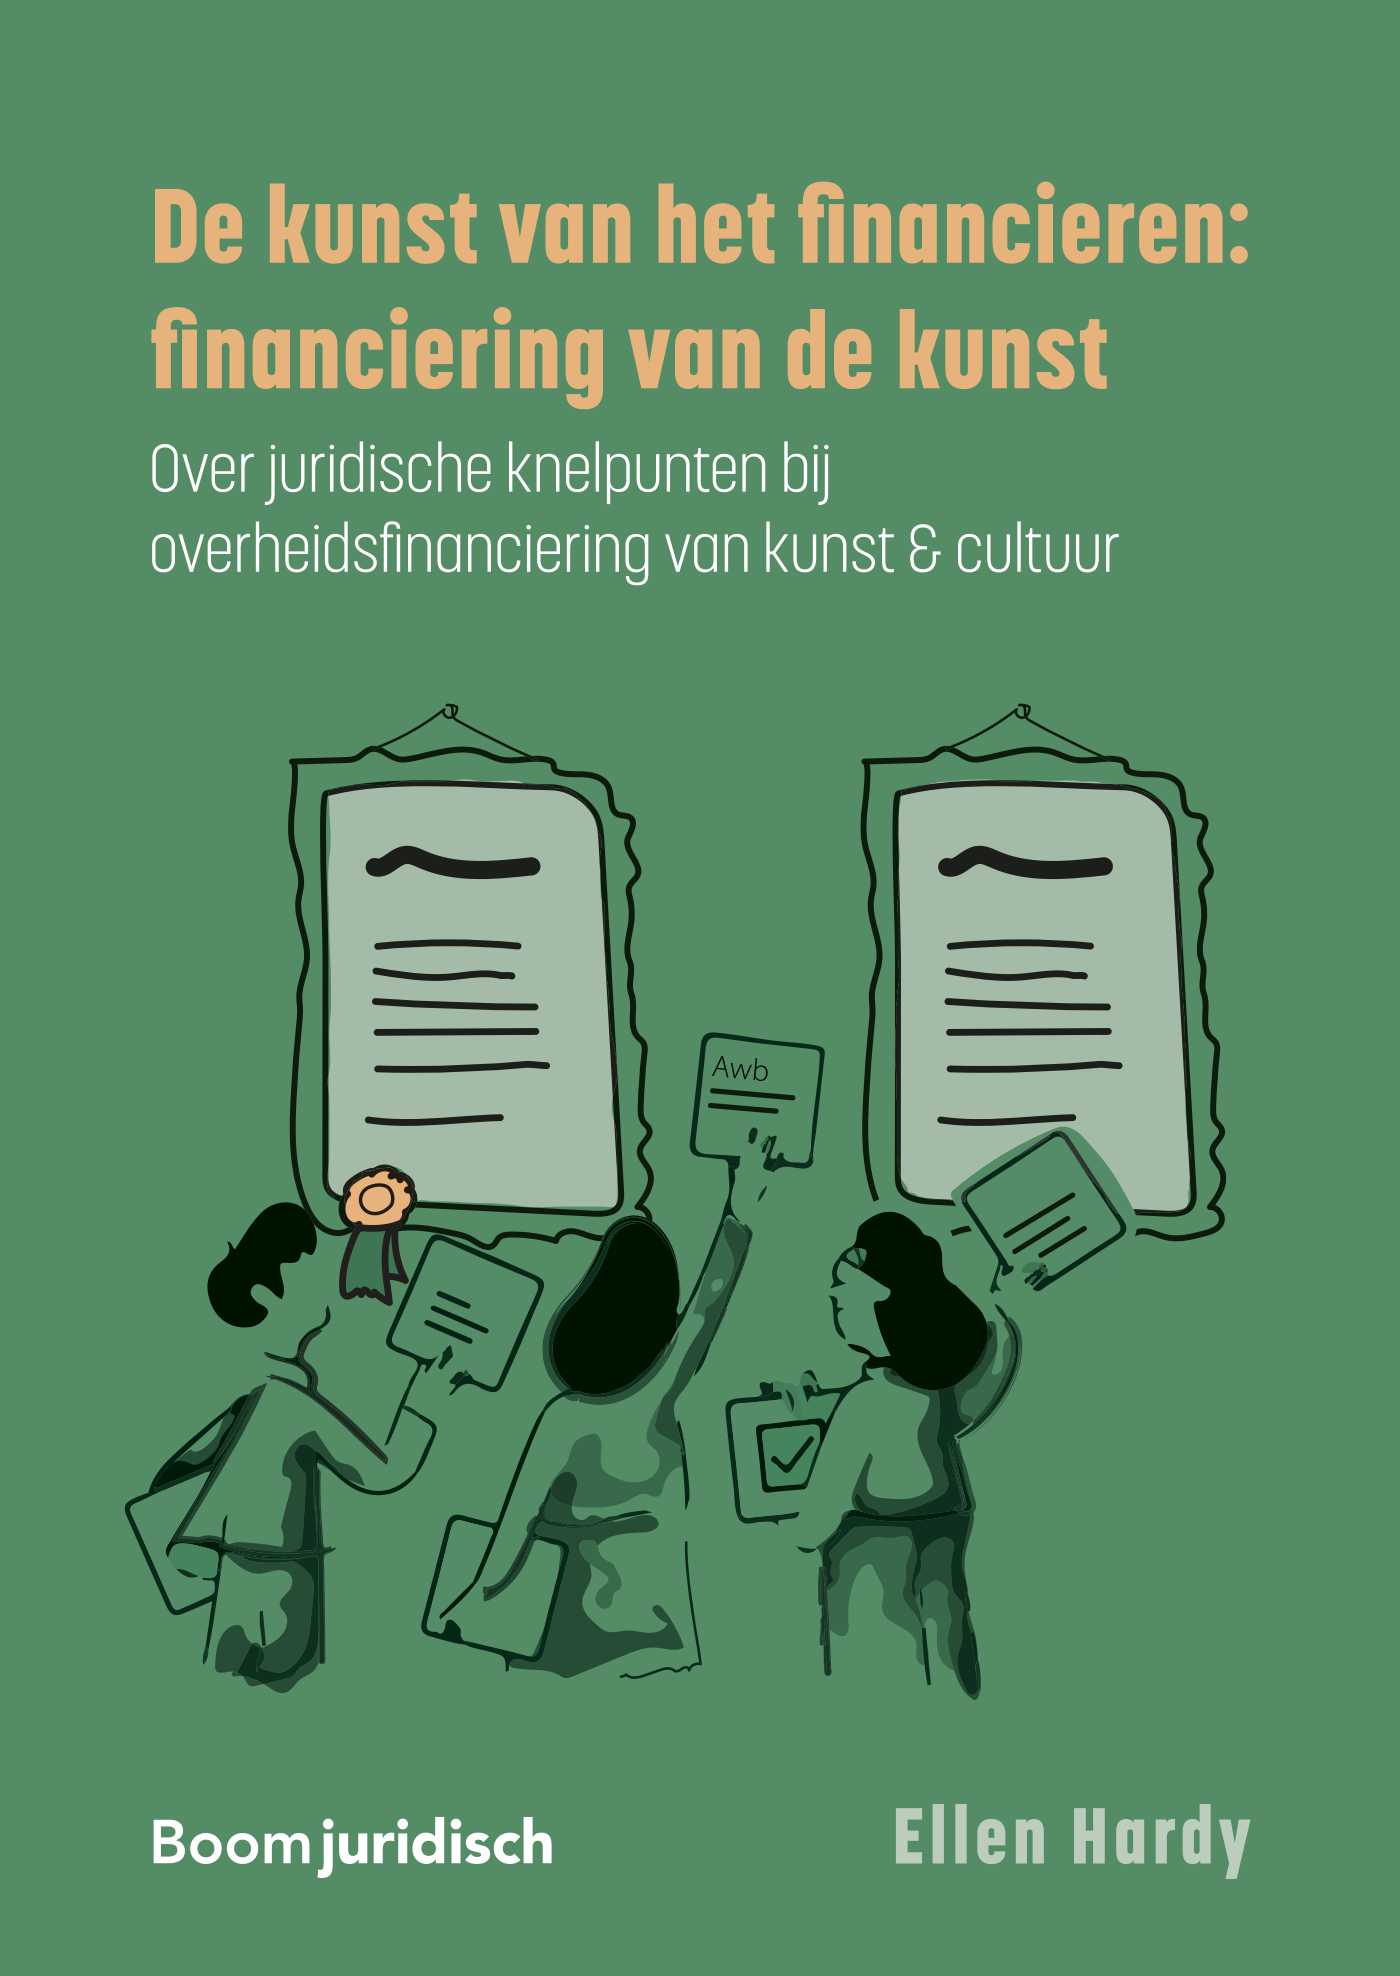 The Art of Funding: Financing the Arts An Examination of Legal Bottlenecks in Government Funding of the Cultural Sector